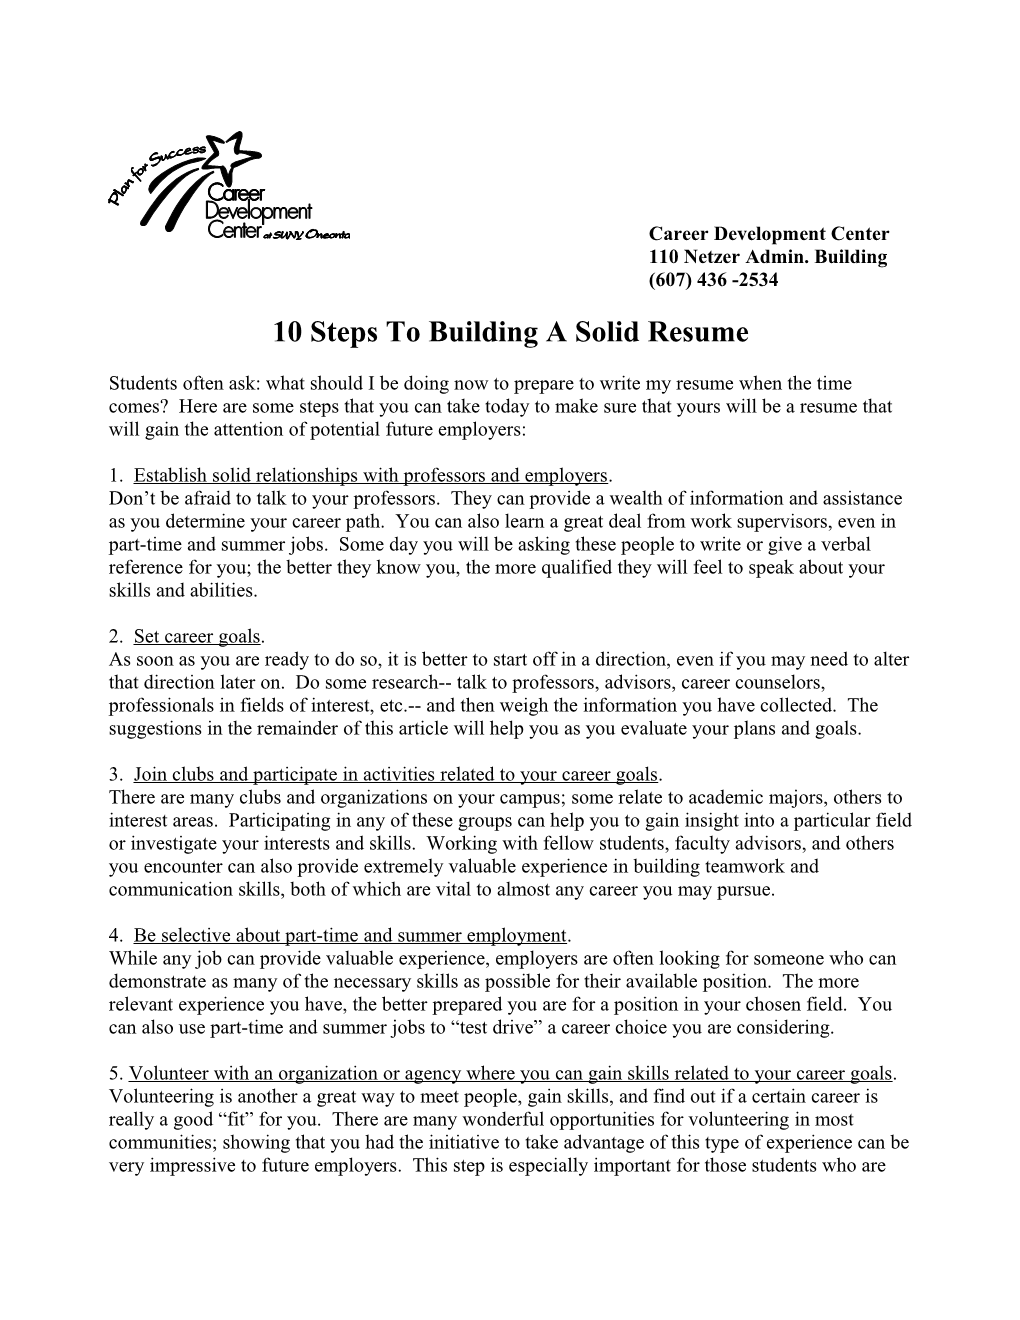 10 Steps to Building a Solid Resume